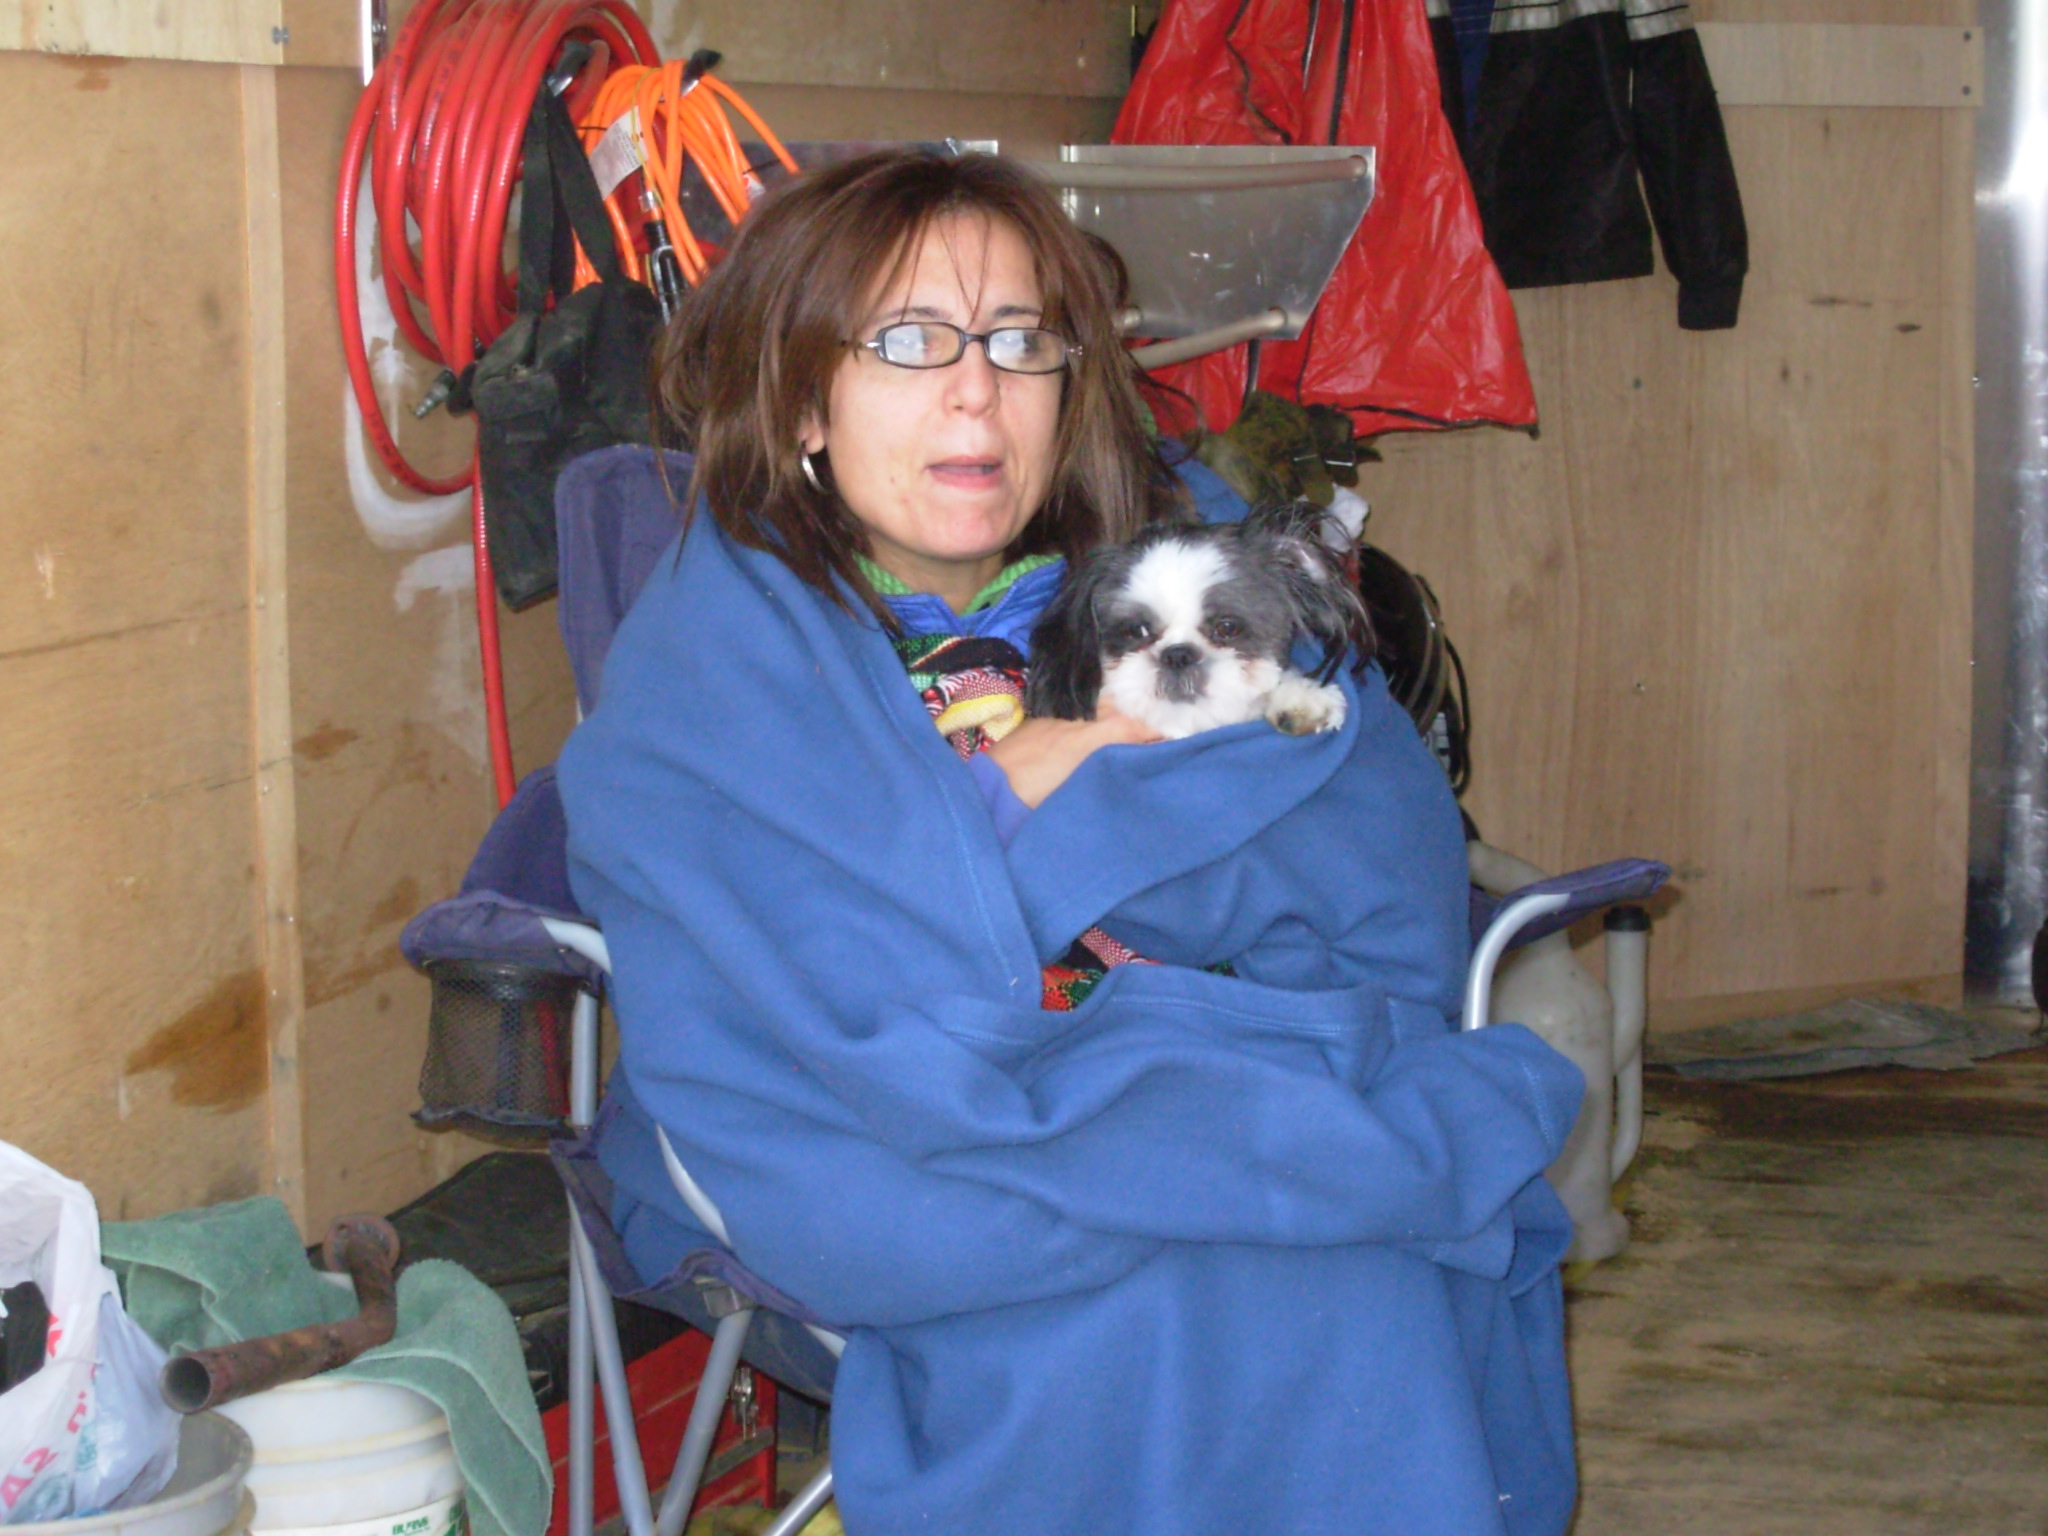 It's a little cold at the Flea Market...
...for man, woman, and beast...
